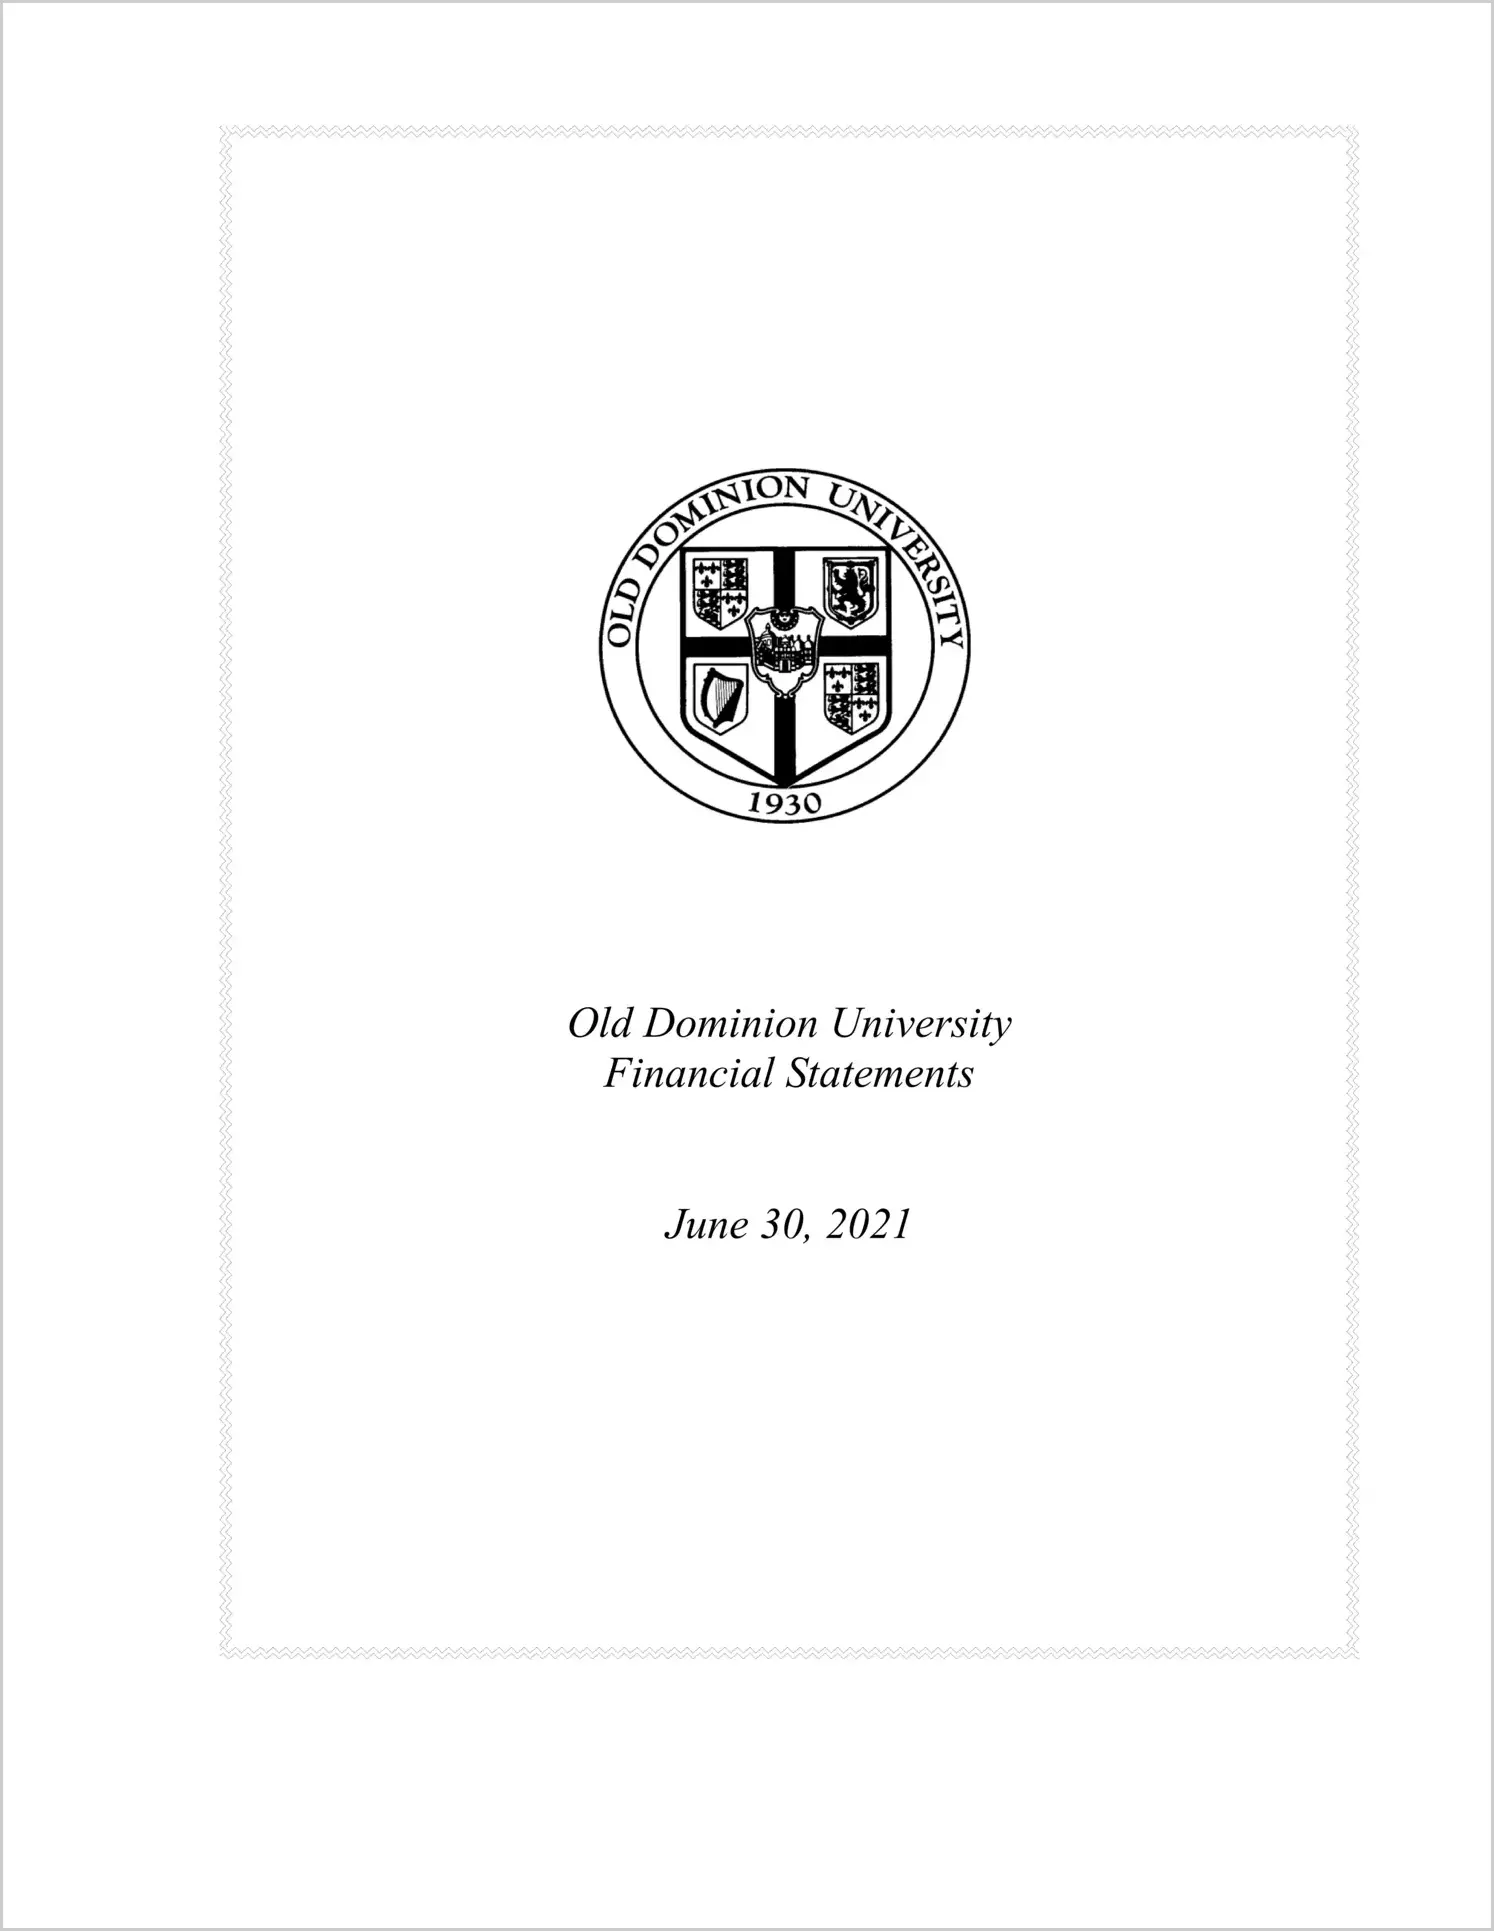 Old Dominion University Financial Statements for the year ended June 30, 2021